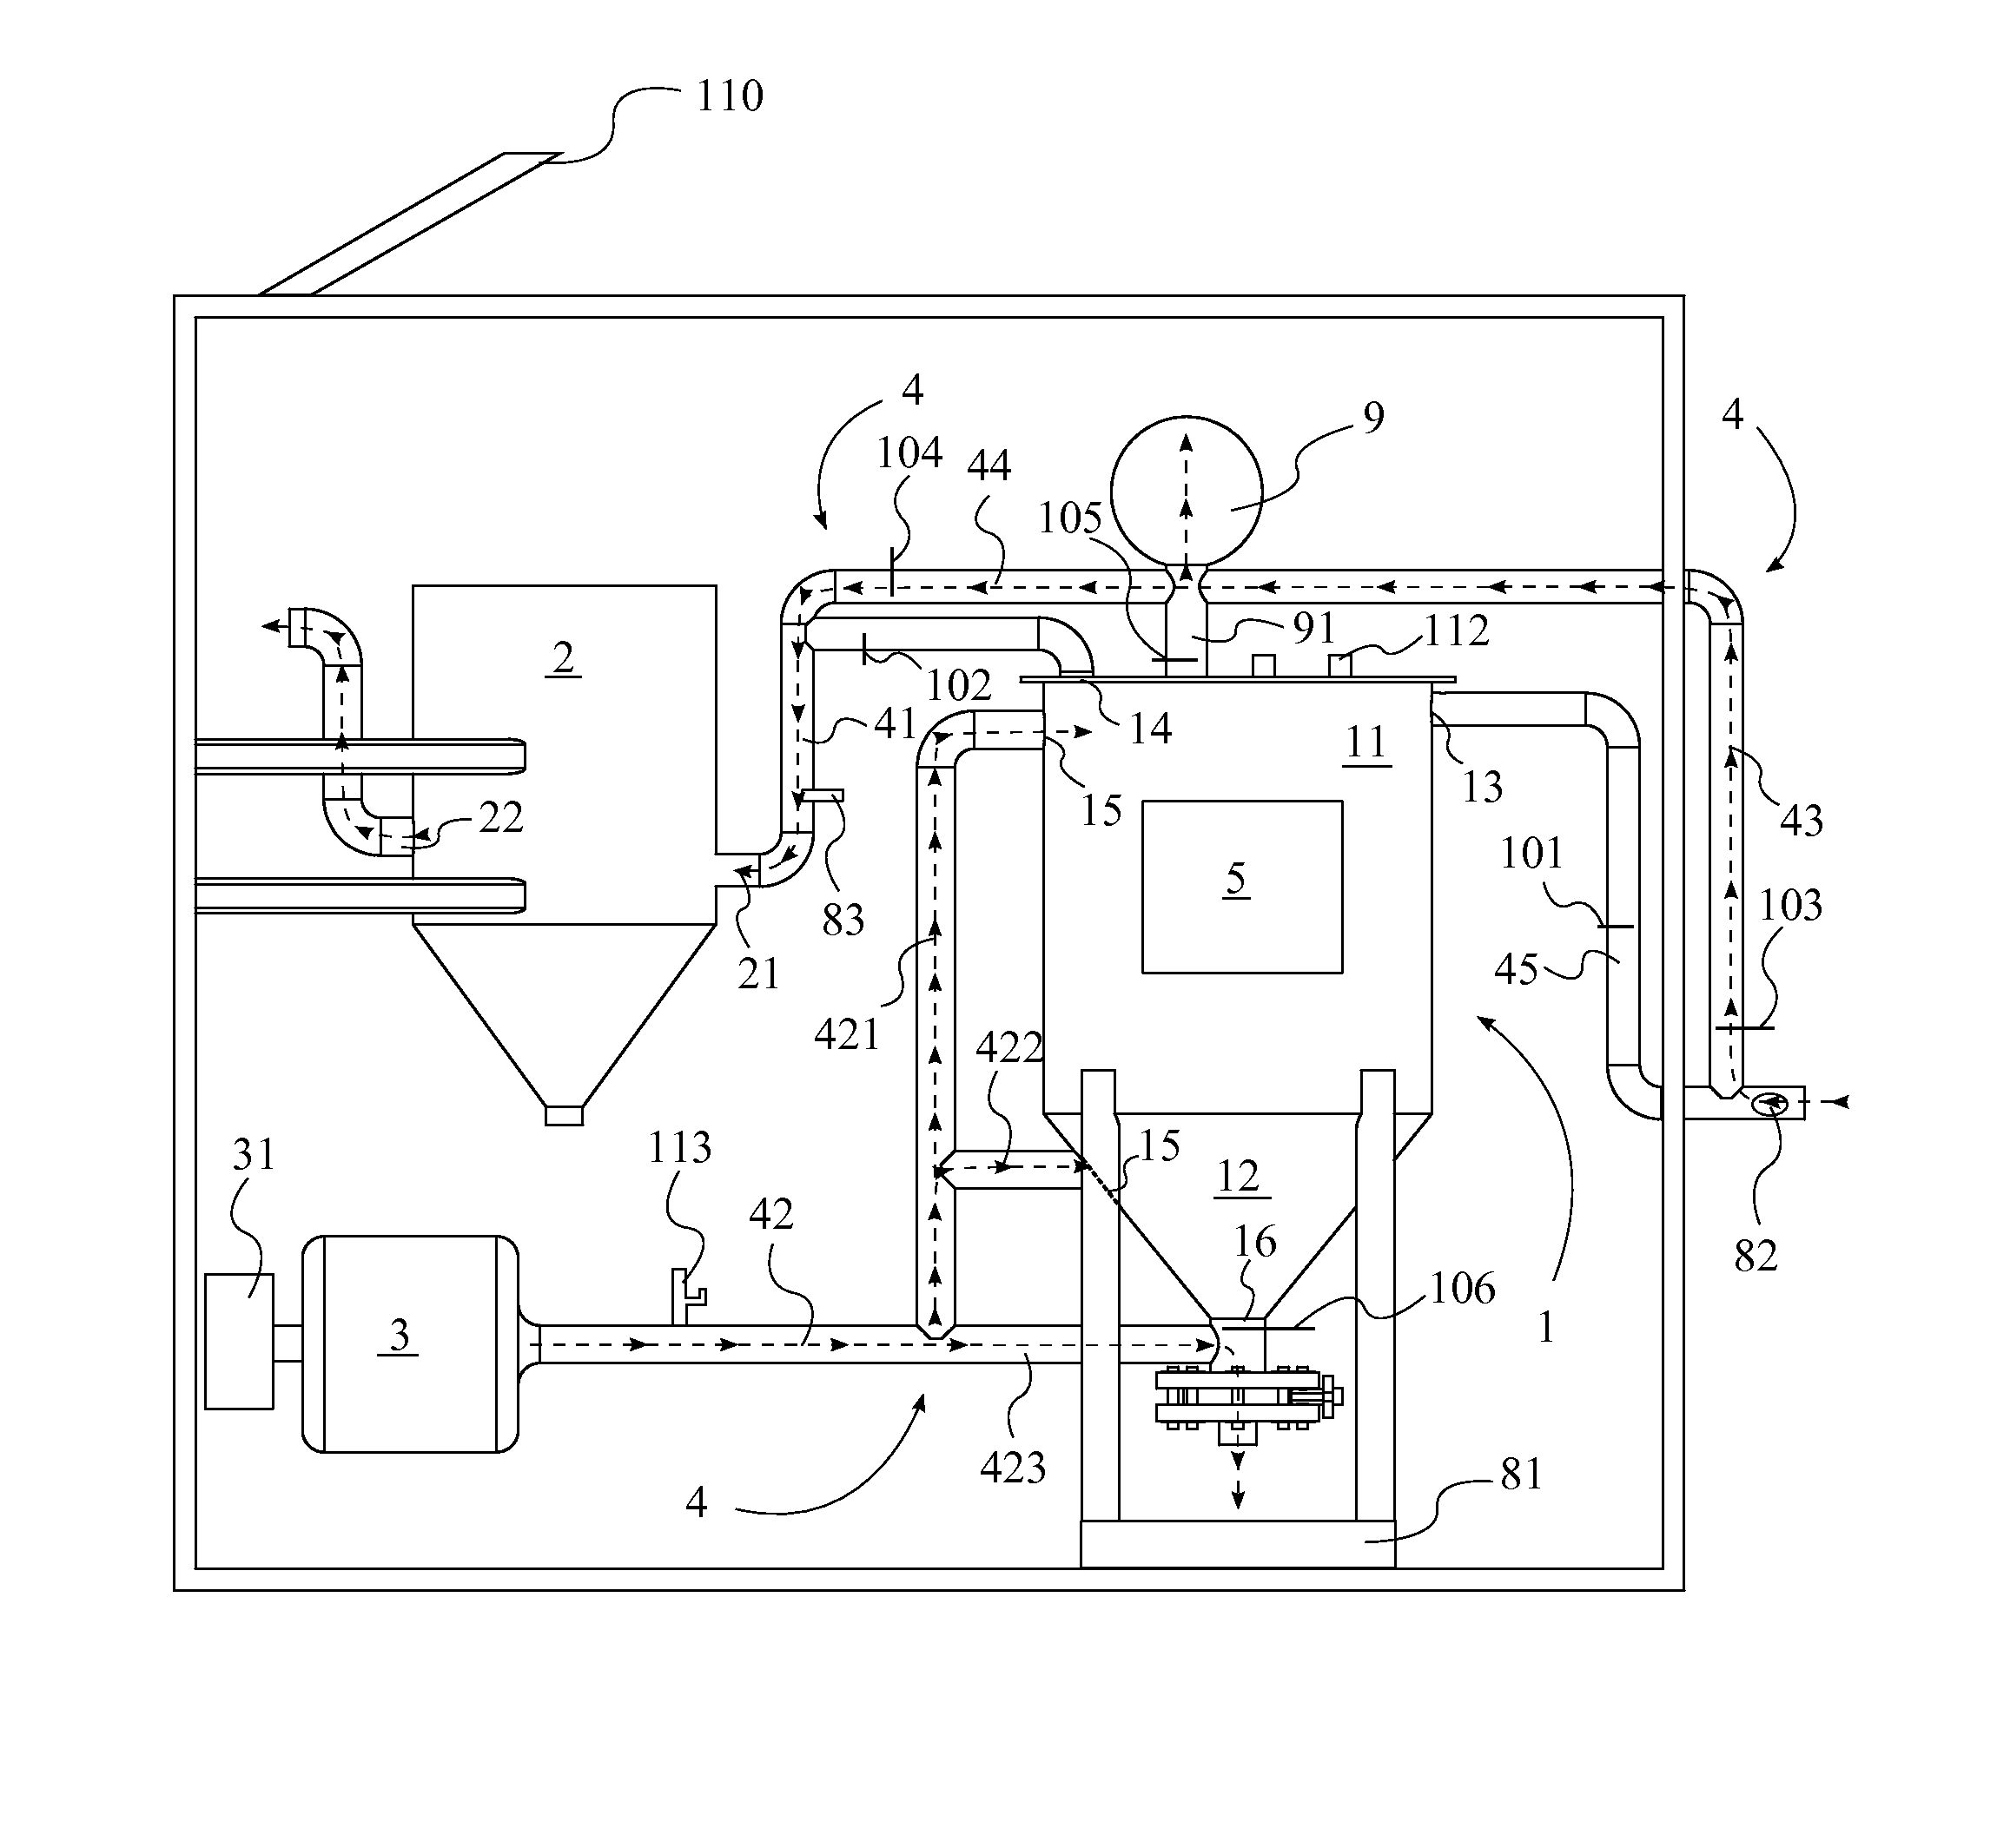 Filtering system for dust material transfer